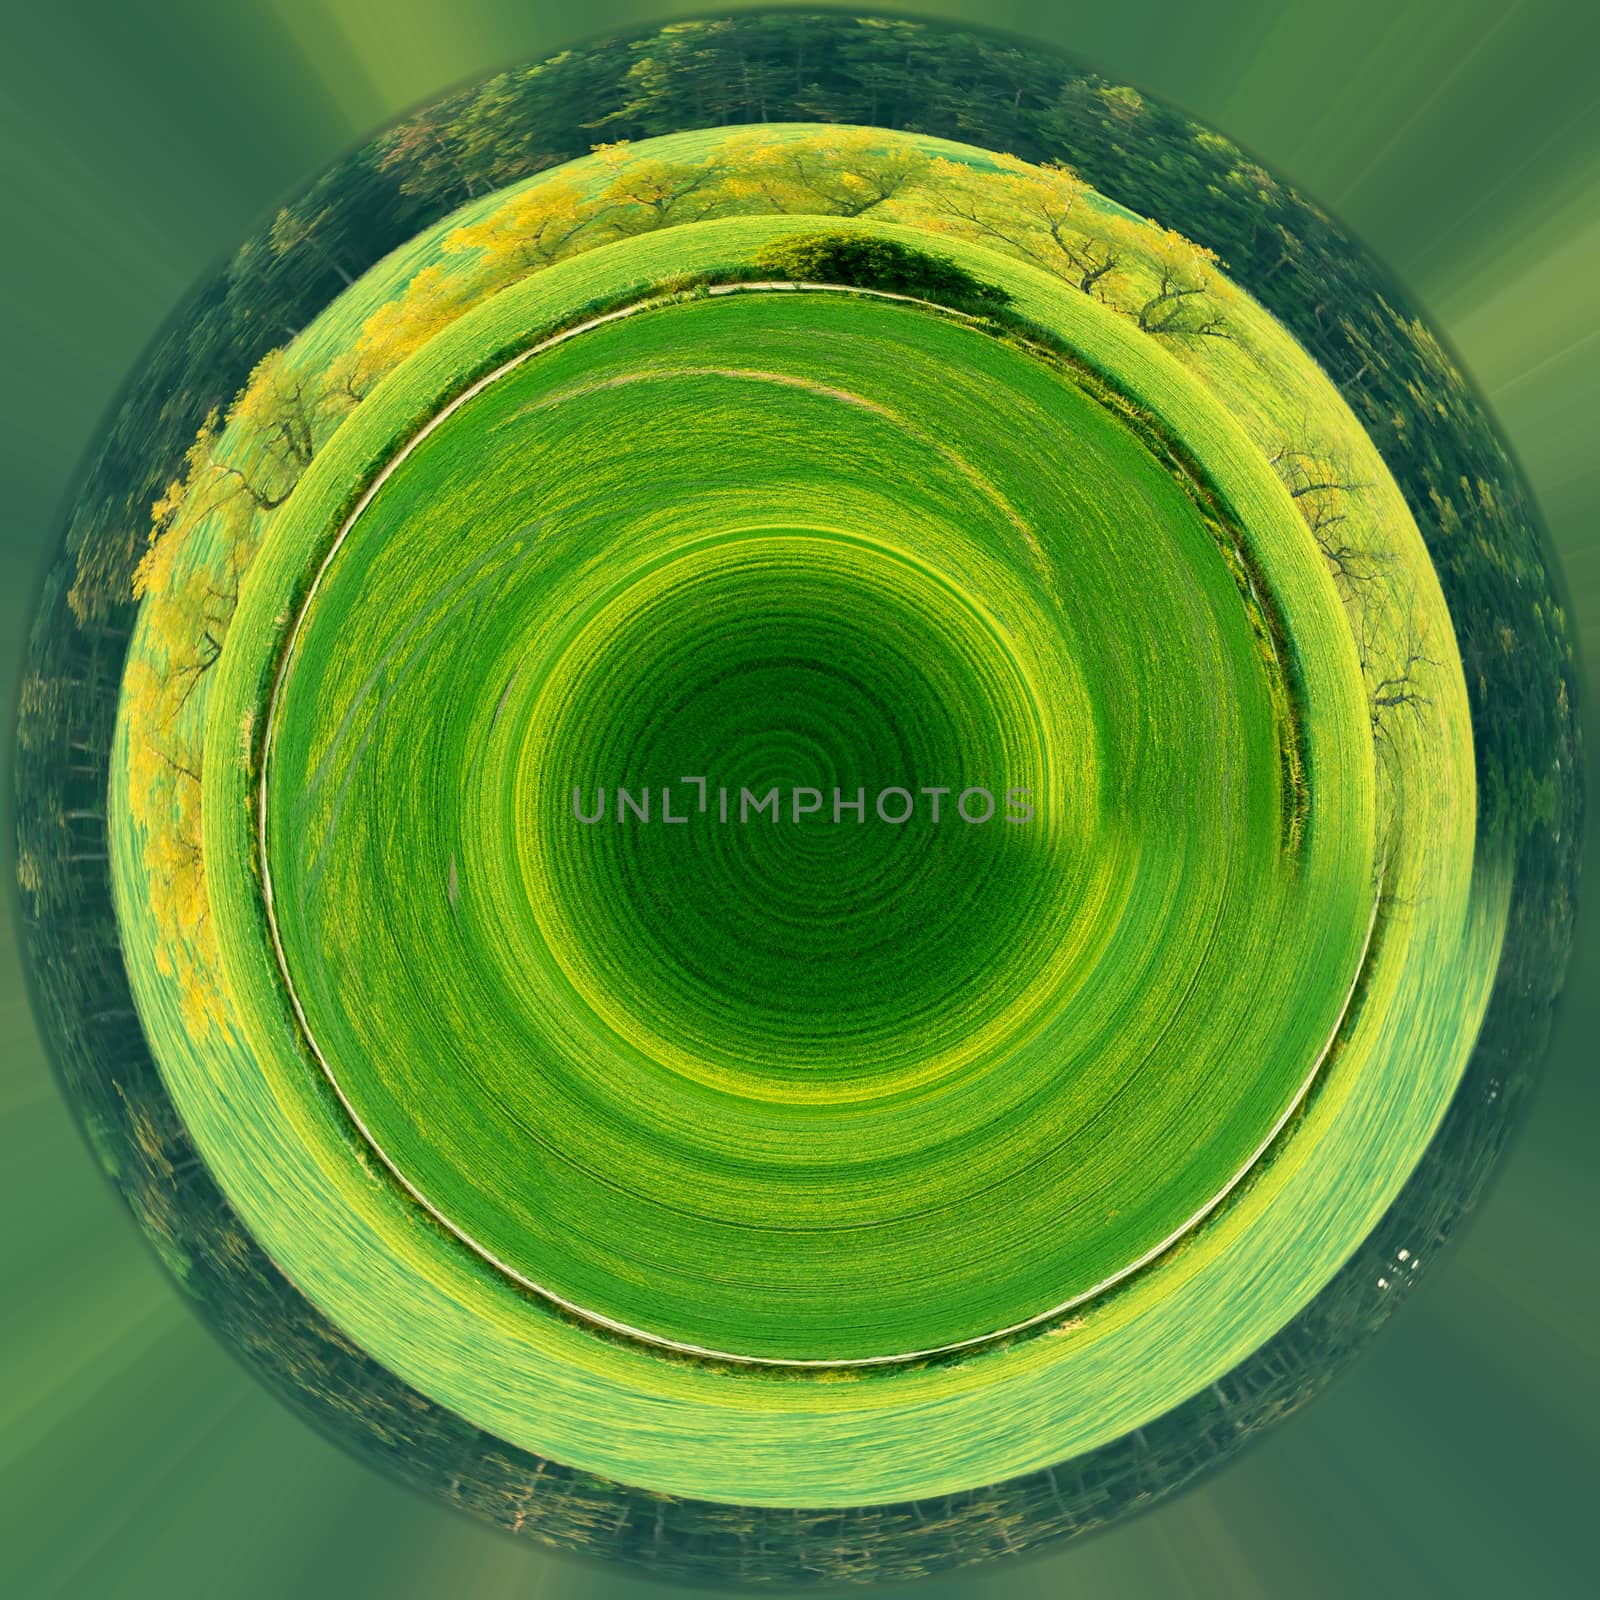 Planet of green spring rural landscape with green field. Rural landscape. Spring landscape. Field in countryside. Beautiful Little planet with green grass, ecology concept. Tiny green planet